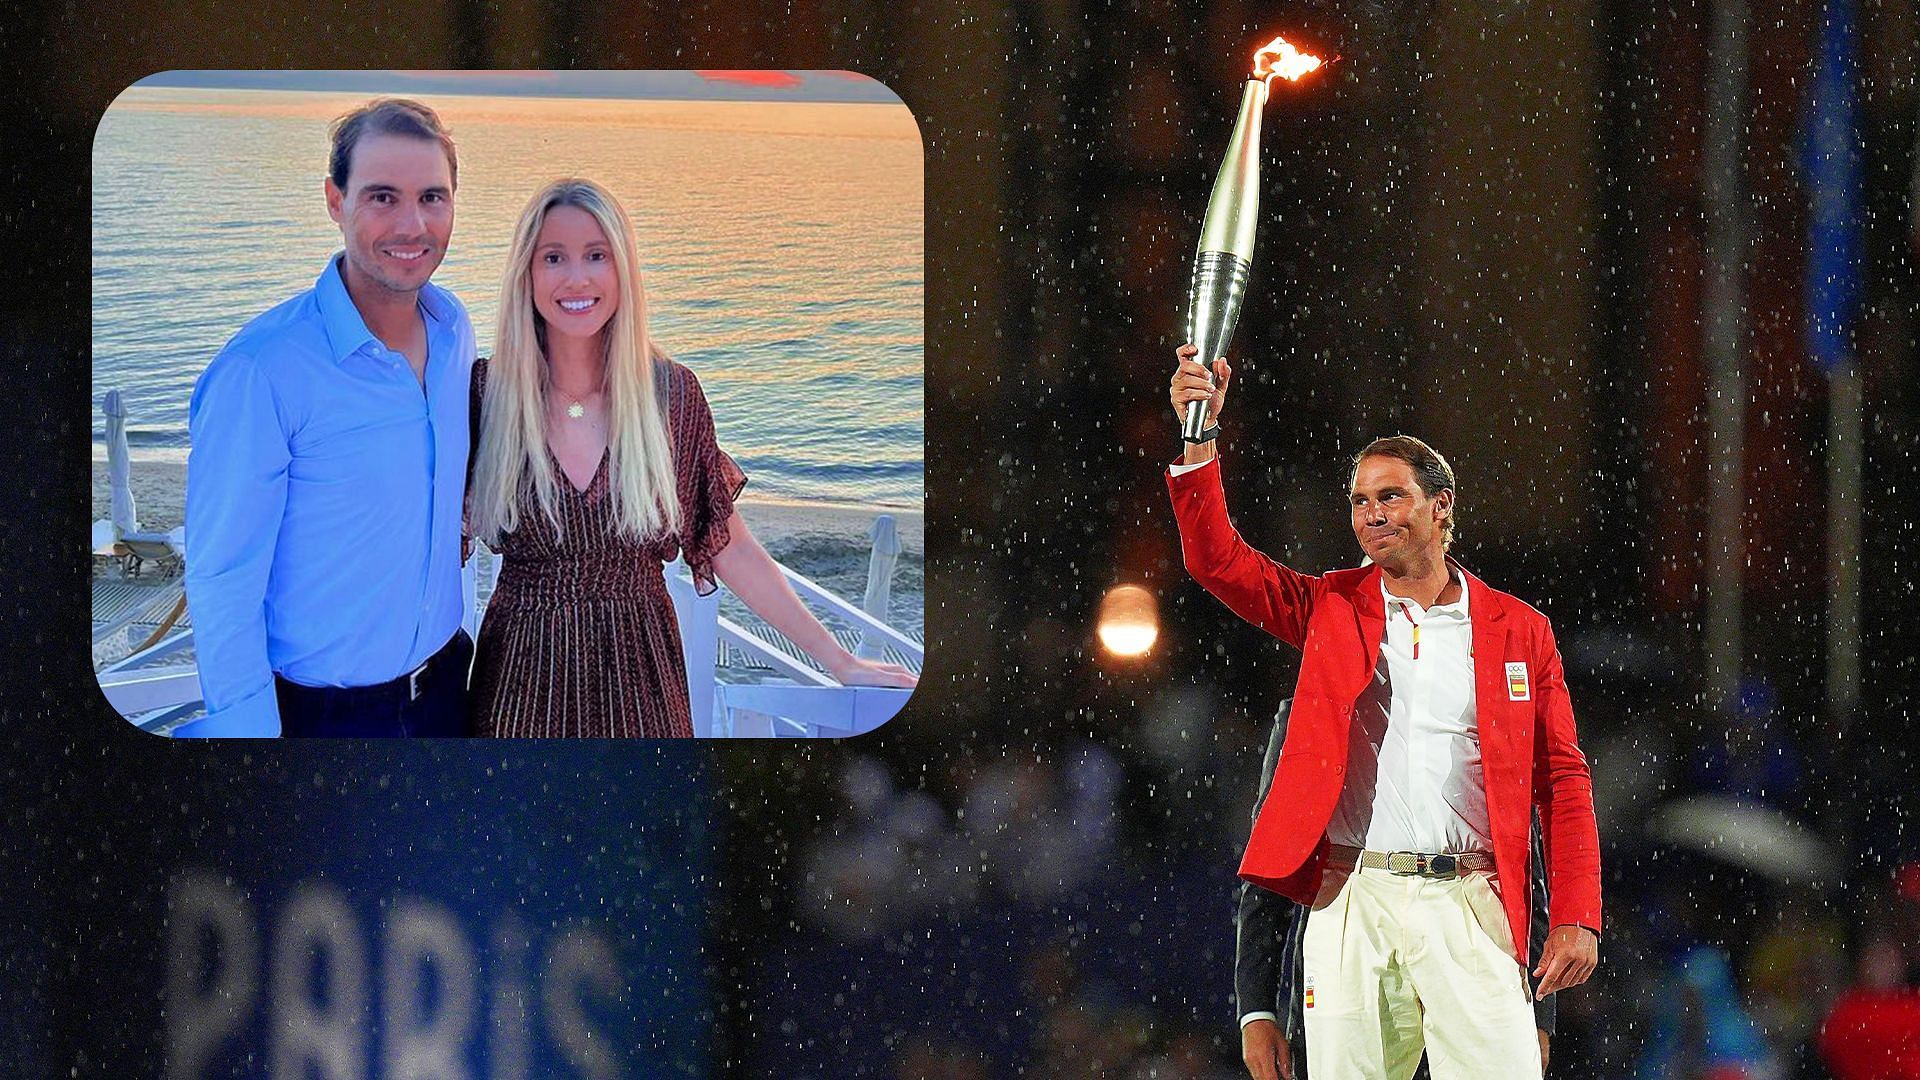 Rafael Nadal's sister Maribel proudly reacts to Spaniard raising the Olympic flame during final moments of torch relay at opening ceremony in Paris